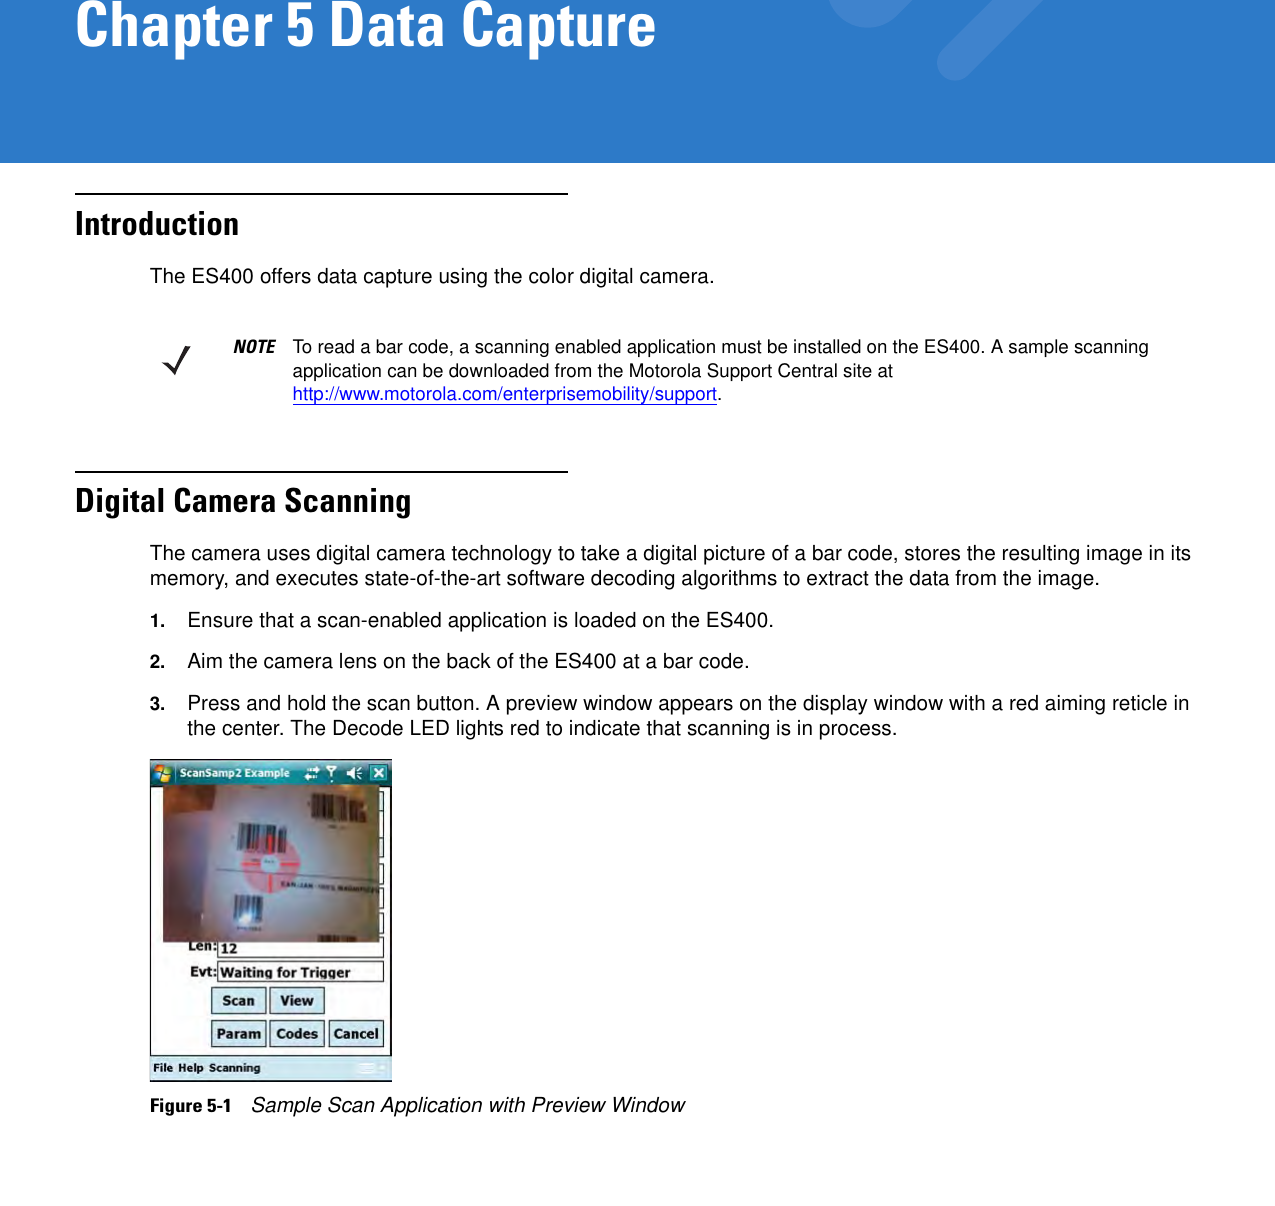 Chapter 5 Data CaptureIntroductionThe ES400 offers data capture using the color digital camera.Digital Camera ScanningThe camera uses digital camera technology to take a digital picture of a bar code, stores the resulting image in its memory, and executes state-of-the-art software decoding algorithms to extract the data from the image.1. Ensure that a scan-enabled application is loaded on the ES400.2. Aim the camera lens on the back of the ES400 at a bar code.3. Press and hold the scan button. A preview window appears on the display window with a red aiming reticle in the center. The Decode LED lights red to indicate that scanning is in process.Figure 5-1    Sample Scan Application with Preview WindowNOTE To read a bar code, a scanning enabled application must be installed on the ES400. A sample scanning application can be downloaded from the Motorola Support Central site at http://www.motorola.com/enterprisemobility/support.